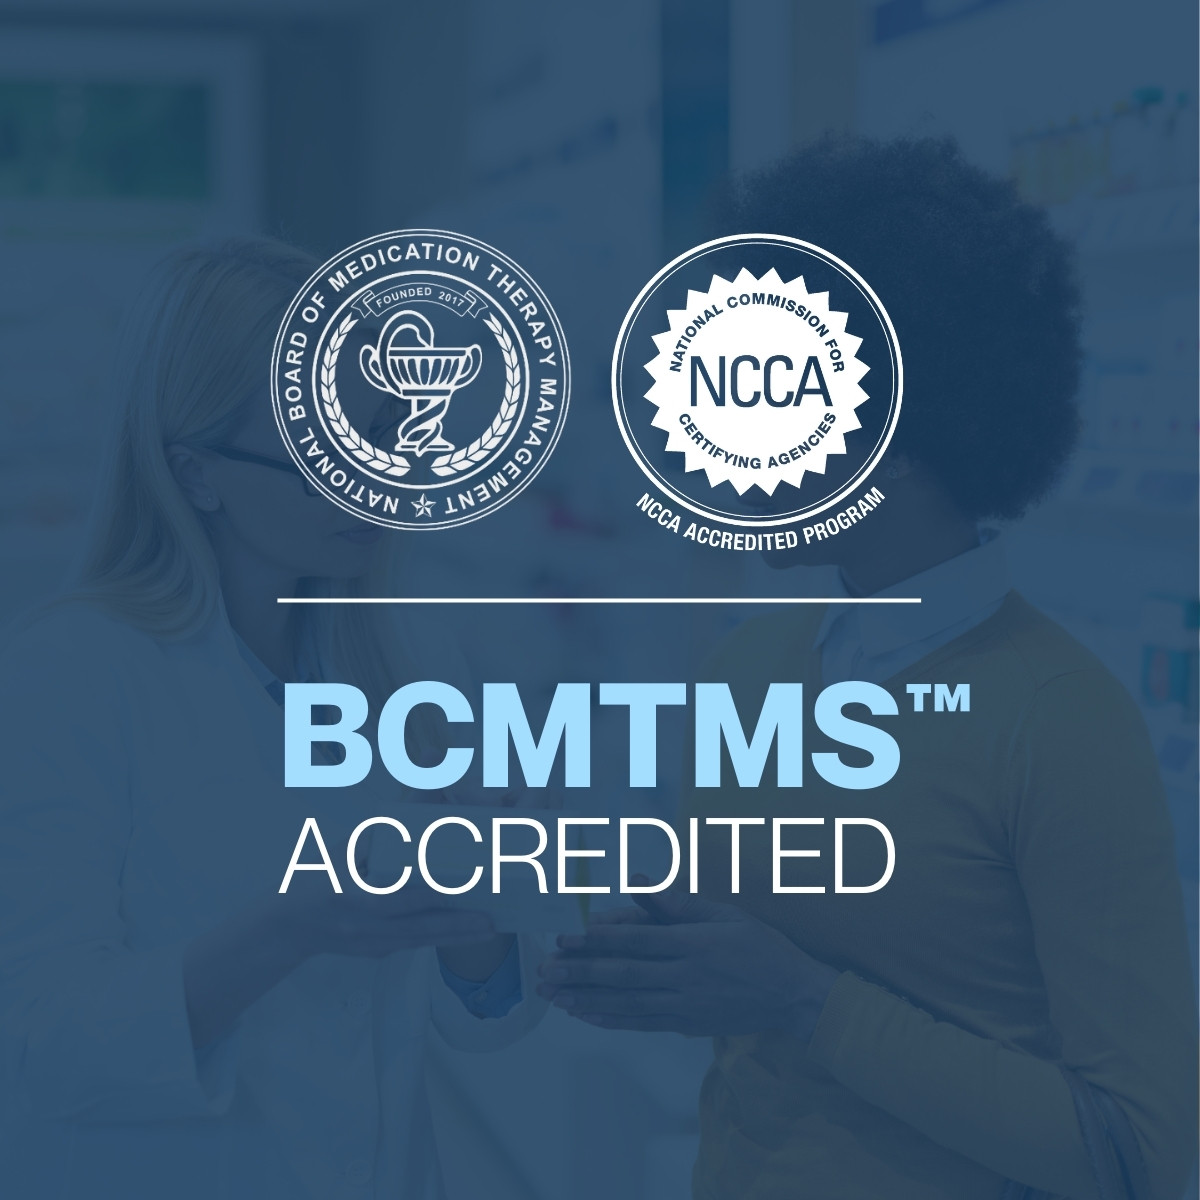 Ncca_bcmtms_accreditation